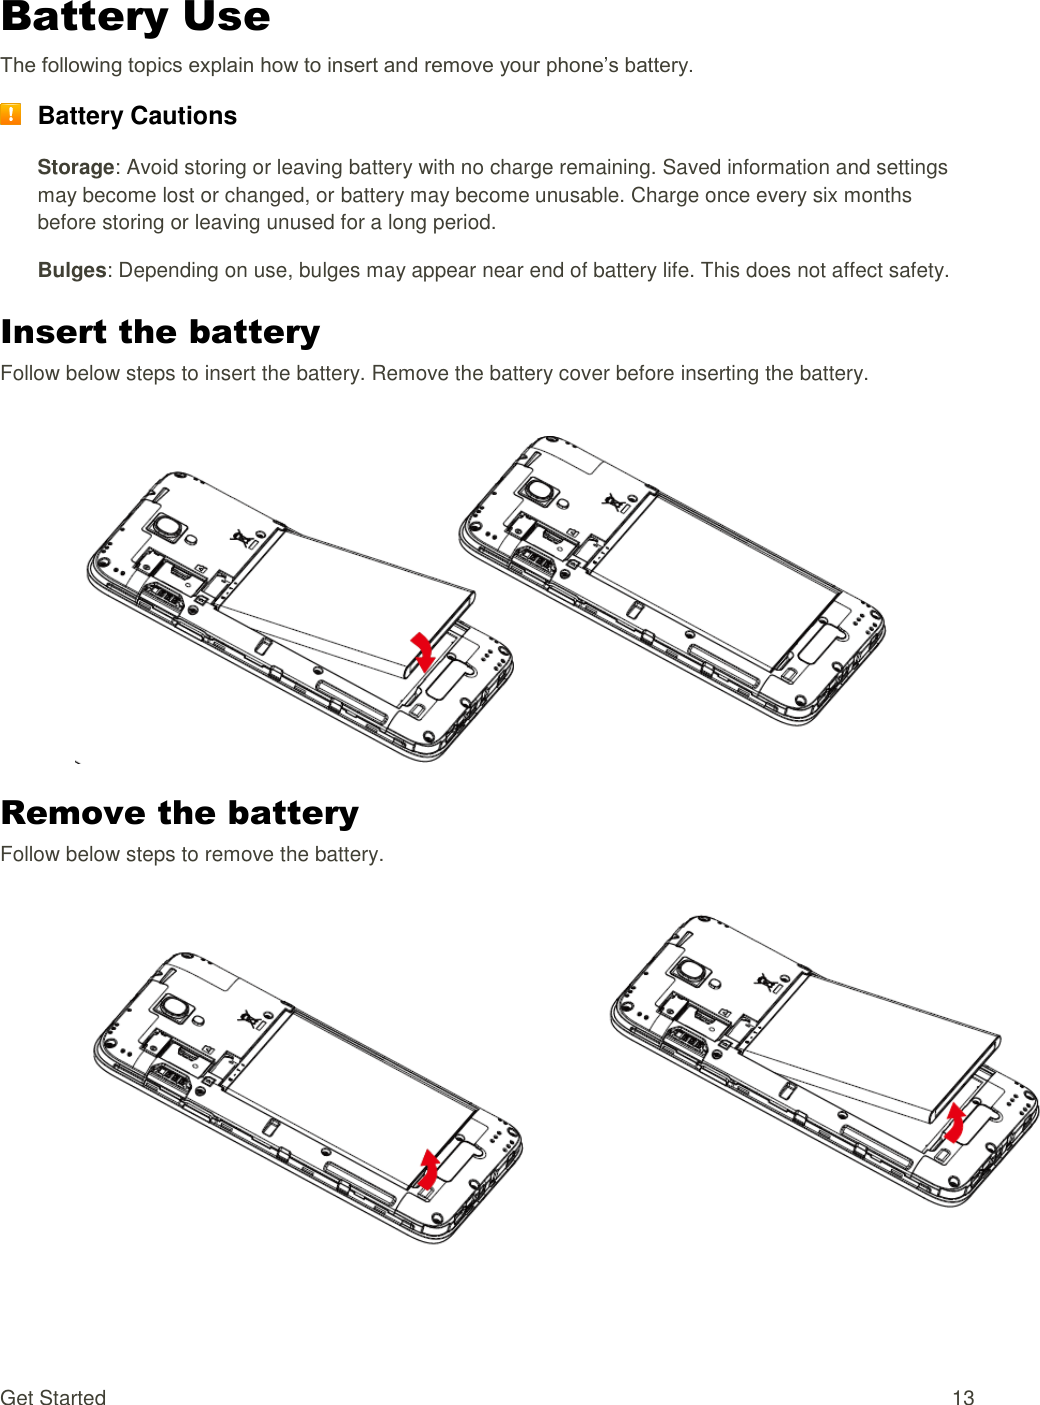 Get Started  13 Battery Use The following topics explain how to insert and remove your phone’s battery.  Battery Cautions Storage: Avoid storing or leaving battery with no charge remaining. Saved information and settings may become lost or changed, or battery may become unusable. Charge once every six months before storing or leaving unused for a long period. Bulges: Depending on use, bulges may appear near end of battery life. This does not affect safety. Insert the battery Follow below steps to insert the battery. Remove the battery cover before inserting the battery.   Remove the battery Follow below steps to remove the battery.   